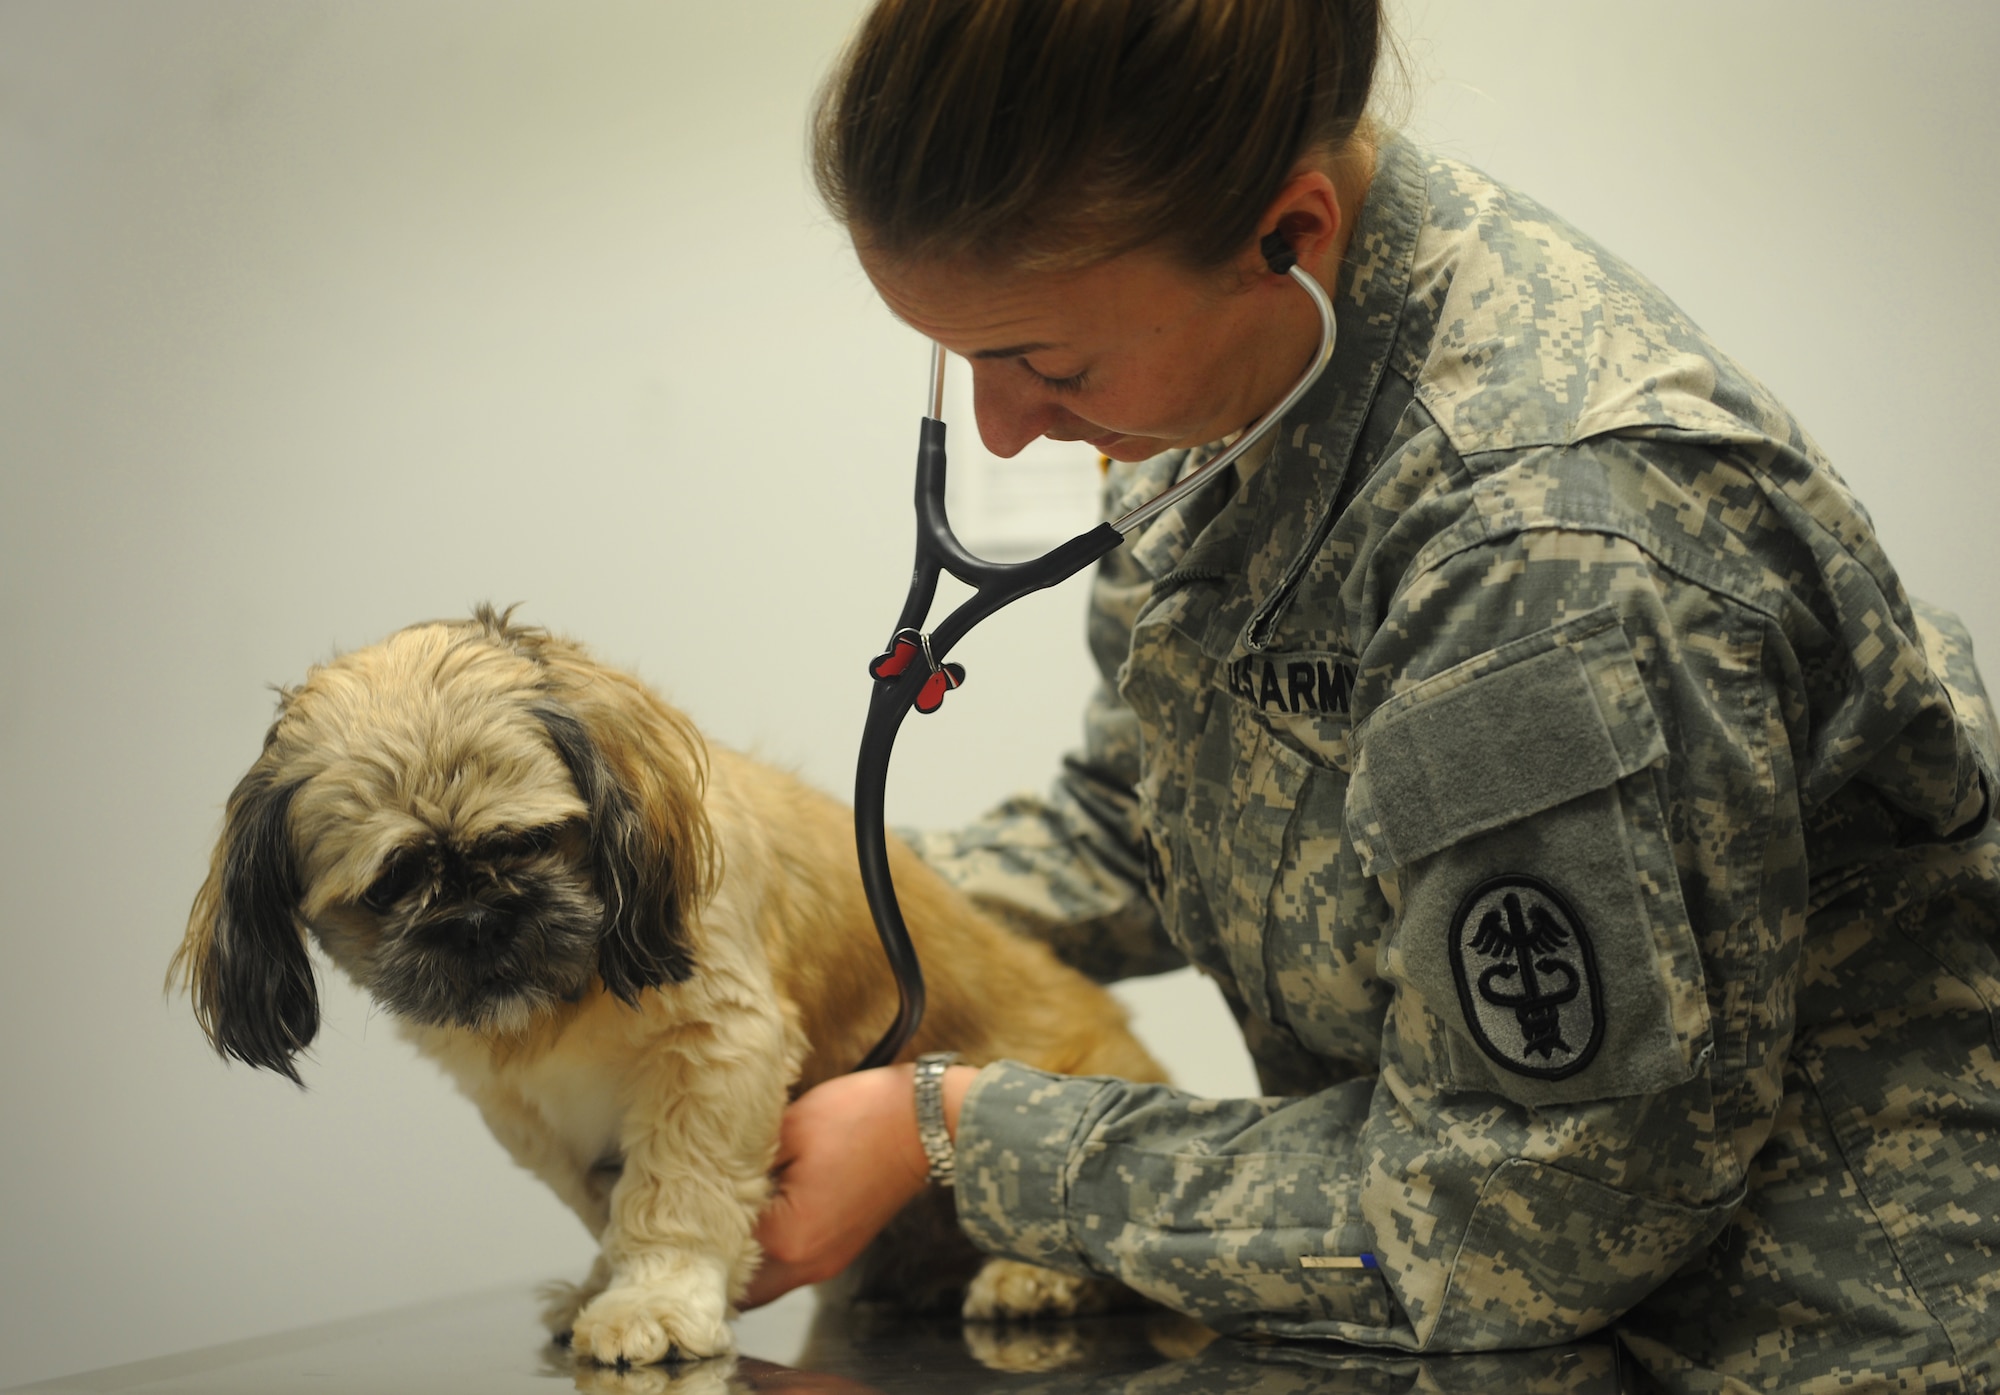 Army Capt. Amanda Jeffries, Chief of Dover Branch Veterinary Services, examines Murphy, a privately owned dog October 15, 2014, at the Veterinary Treatment Facility on Dover Air Force Base, Del. The VTF offers preventative medicine for privately owned animals of service members, retirees, Reservists and National Guard members. (U.S. Air Force photo by Staff Sgt. Elizabeth Morris)